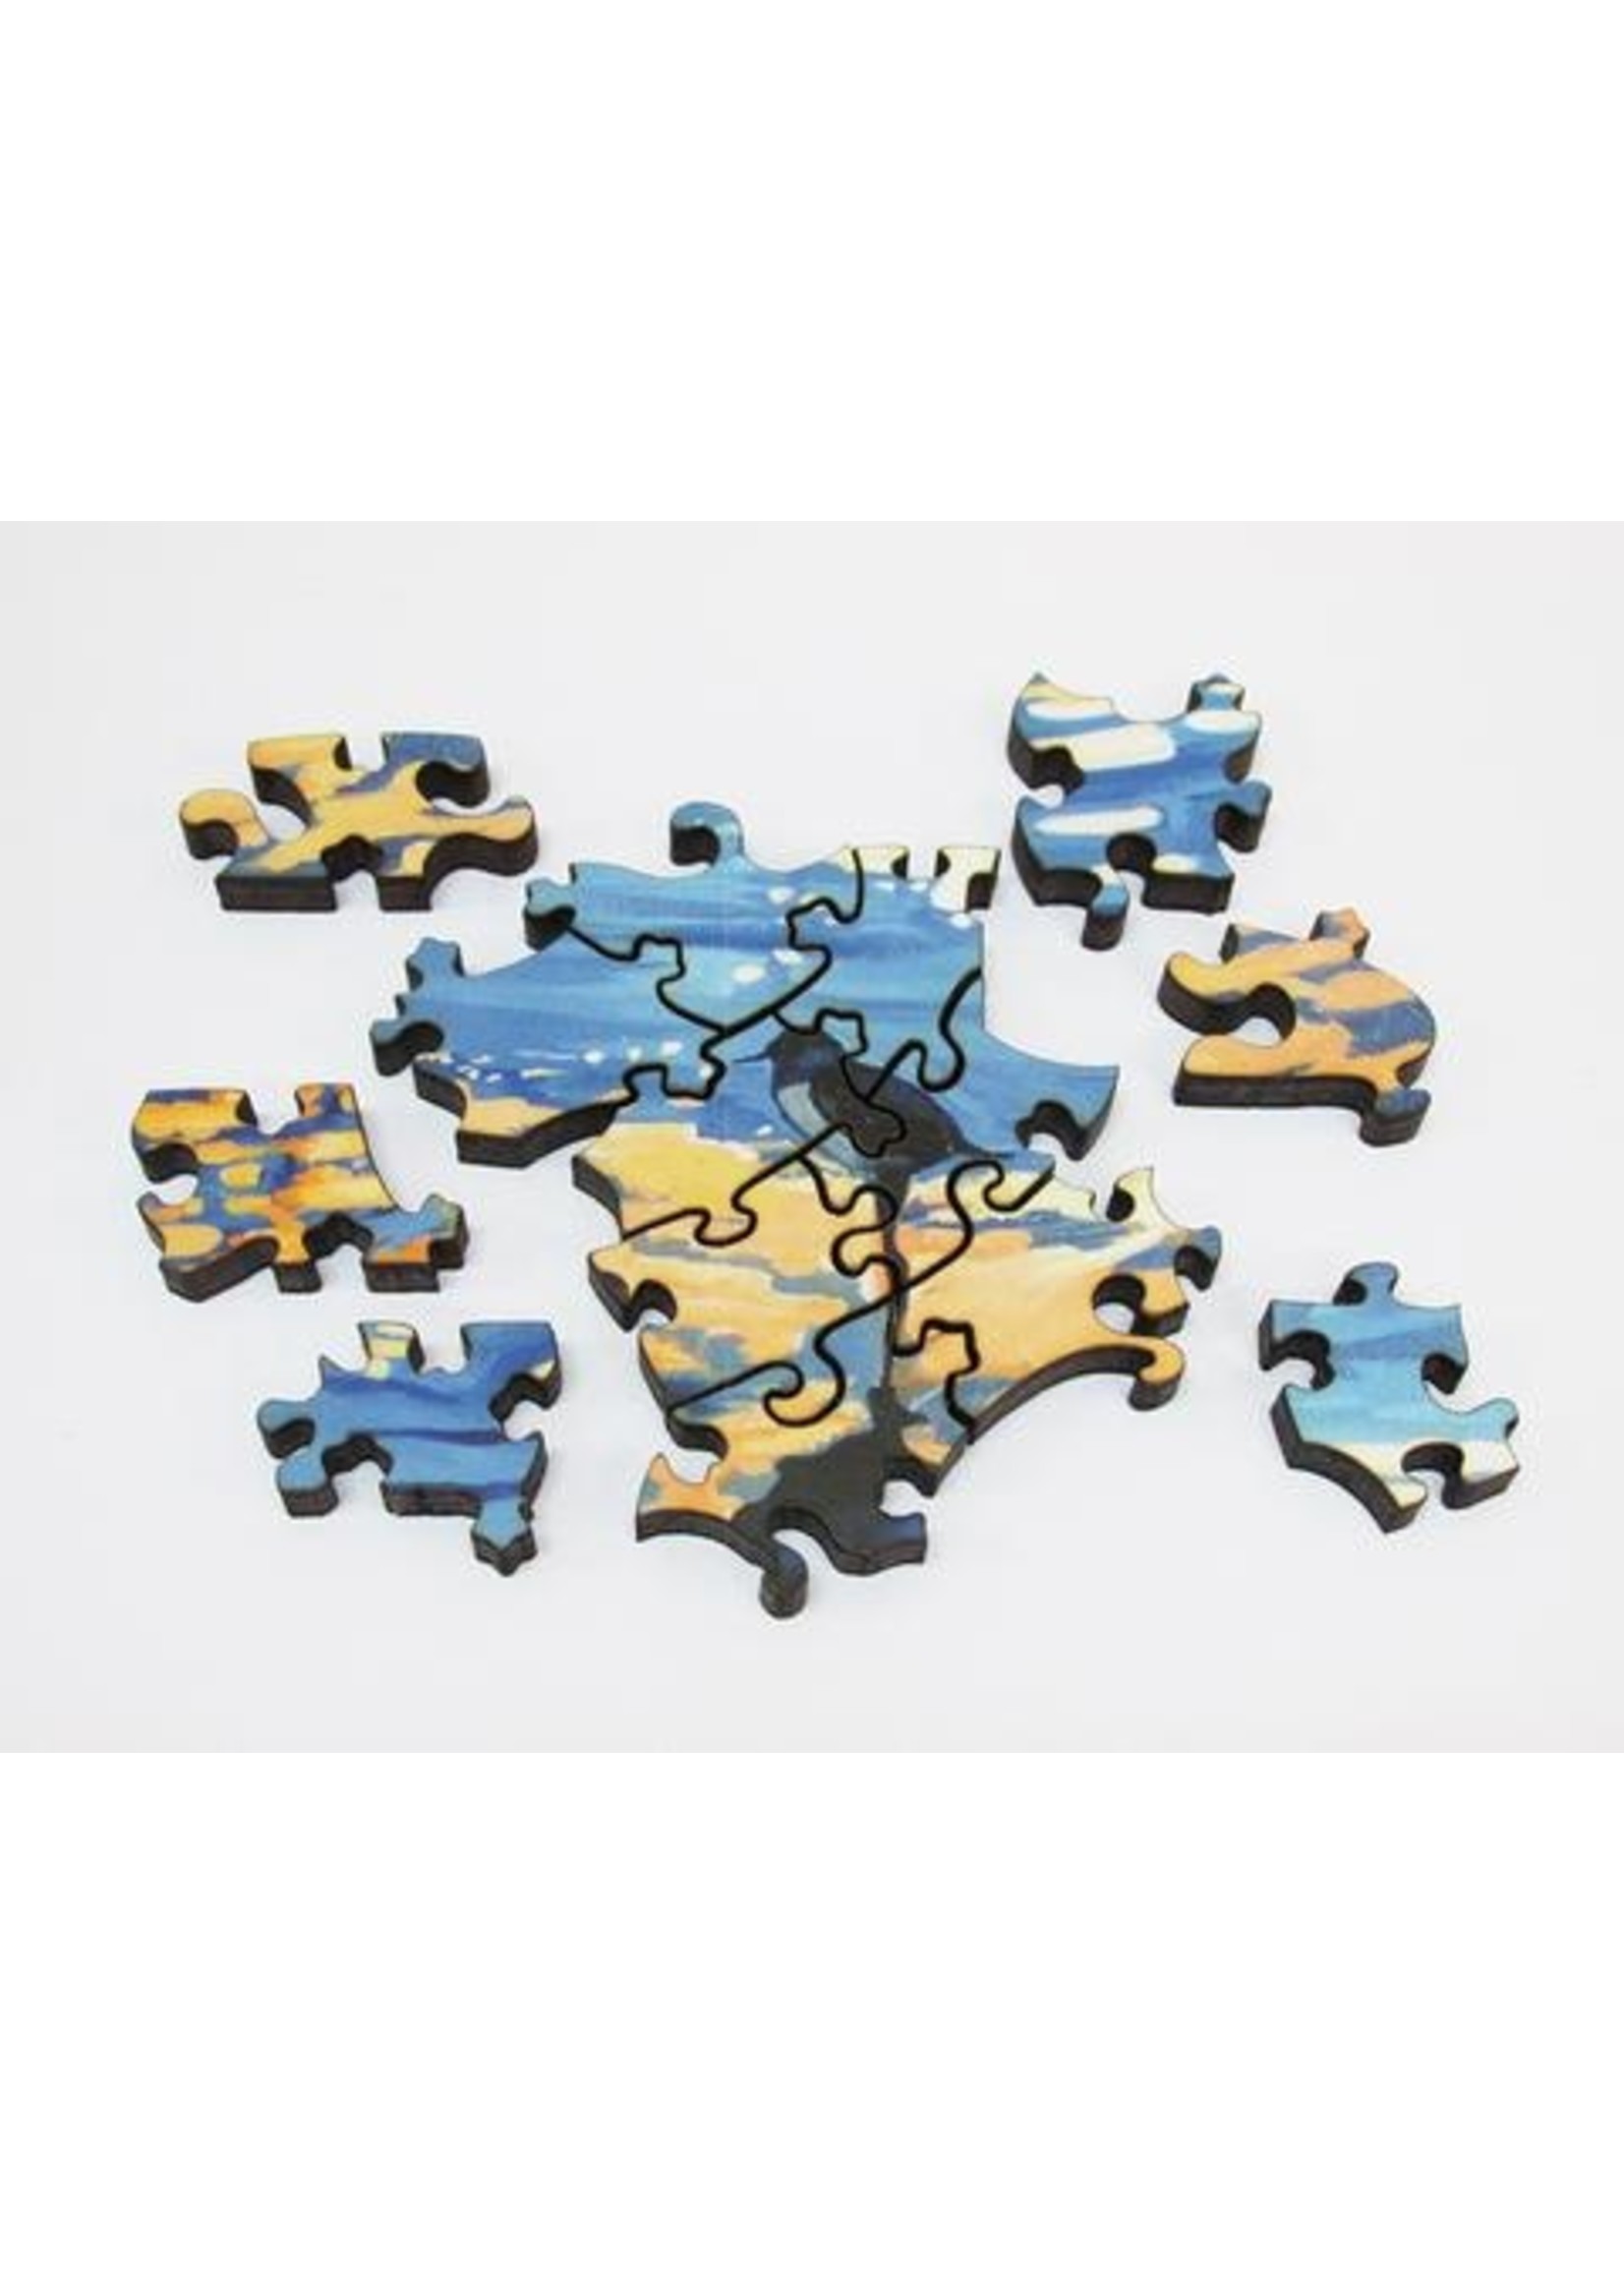 Artifact Puzzles "Sandpipers" Artifact Wooden Jigsaw Puzzle